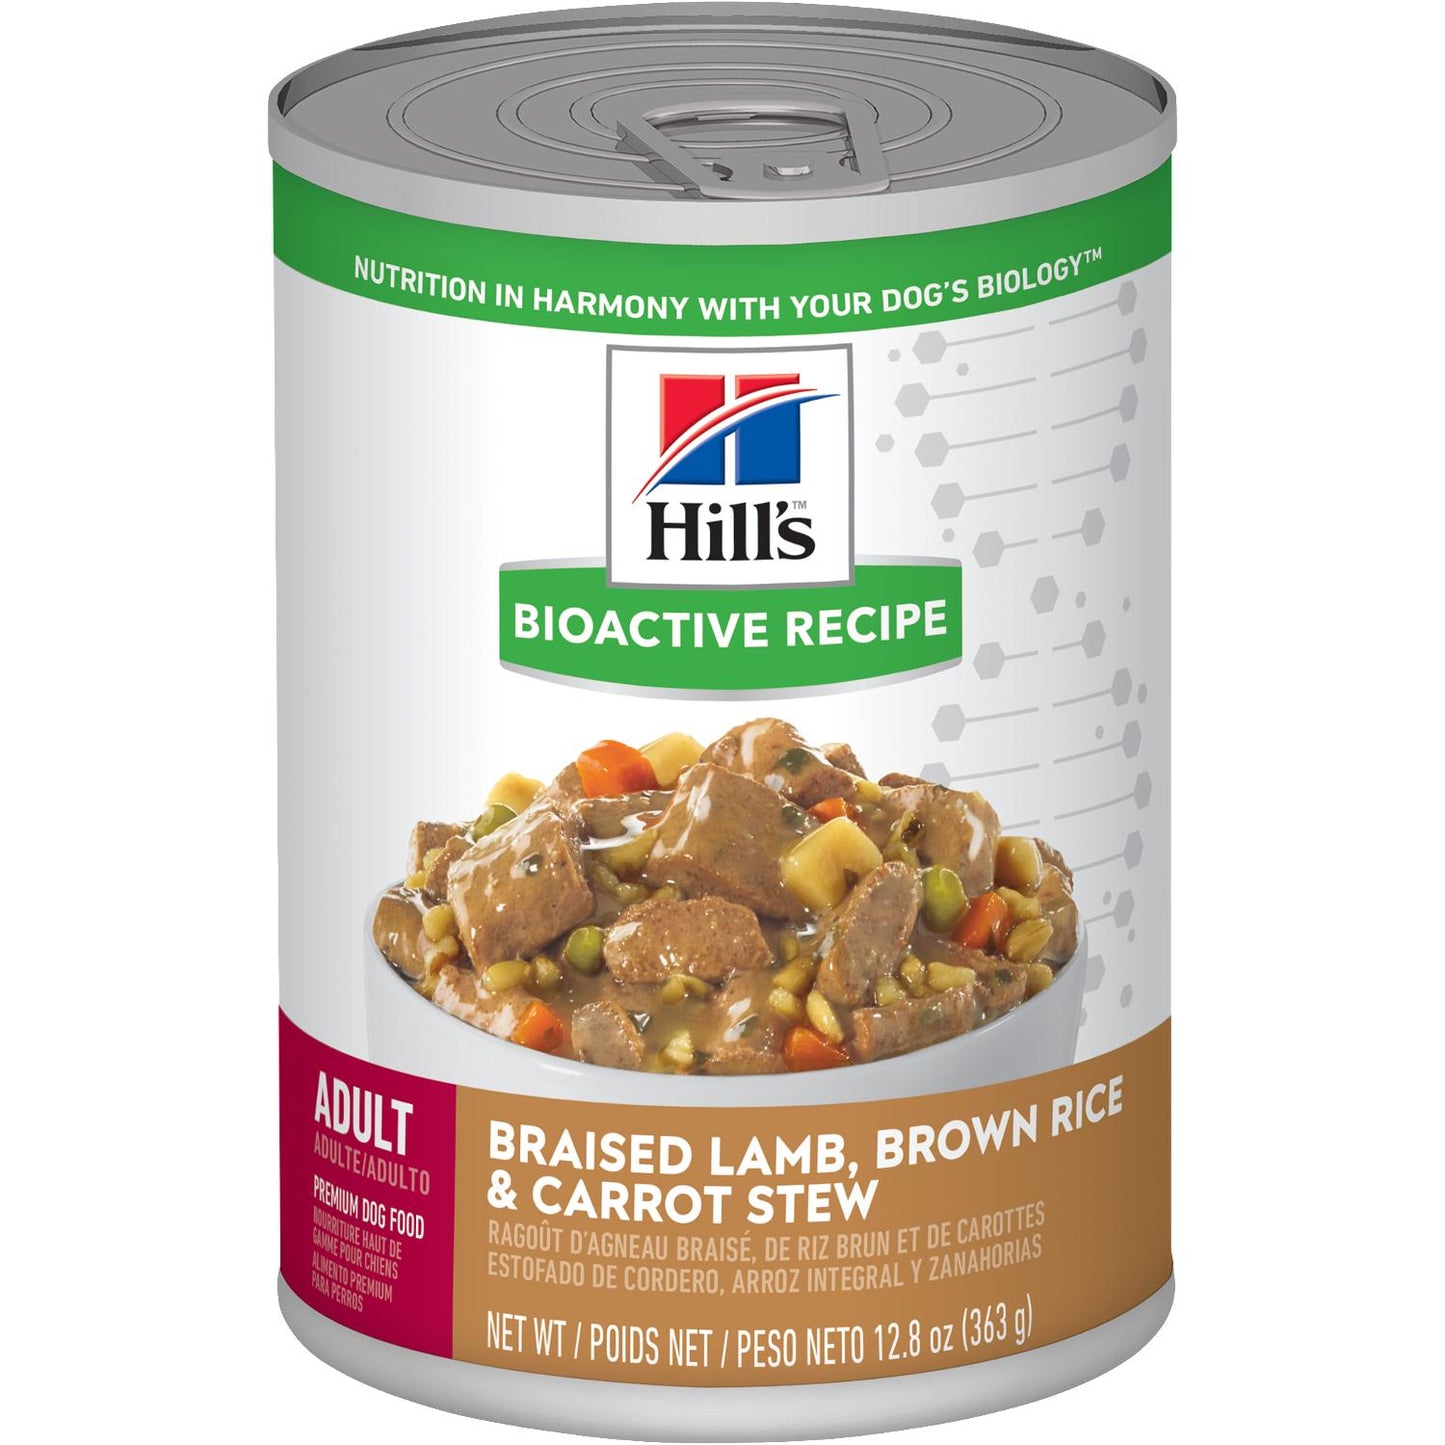 Hill's Bioactive Recipe Adult Braised Lamb, Brown Rice & Carrot Stew dog food